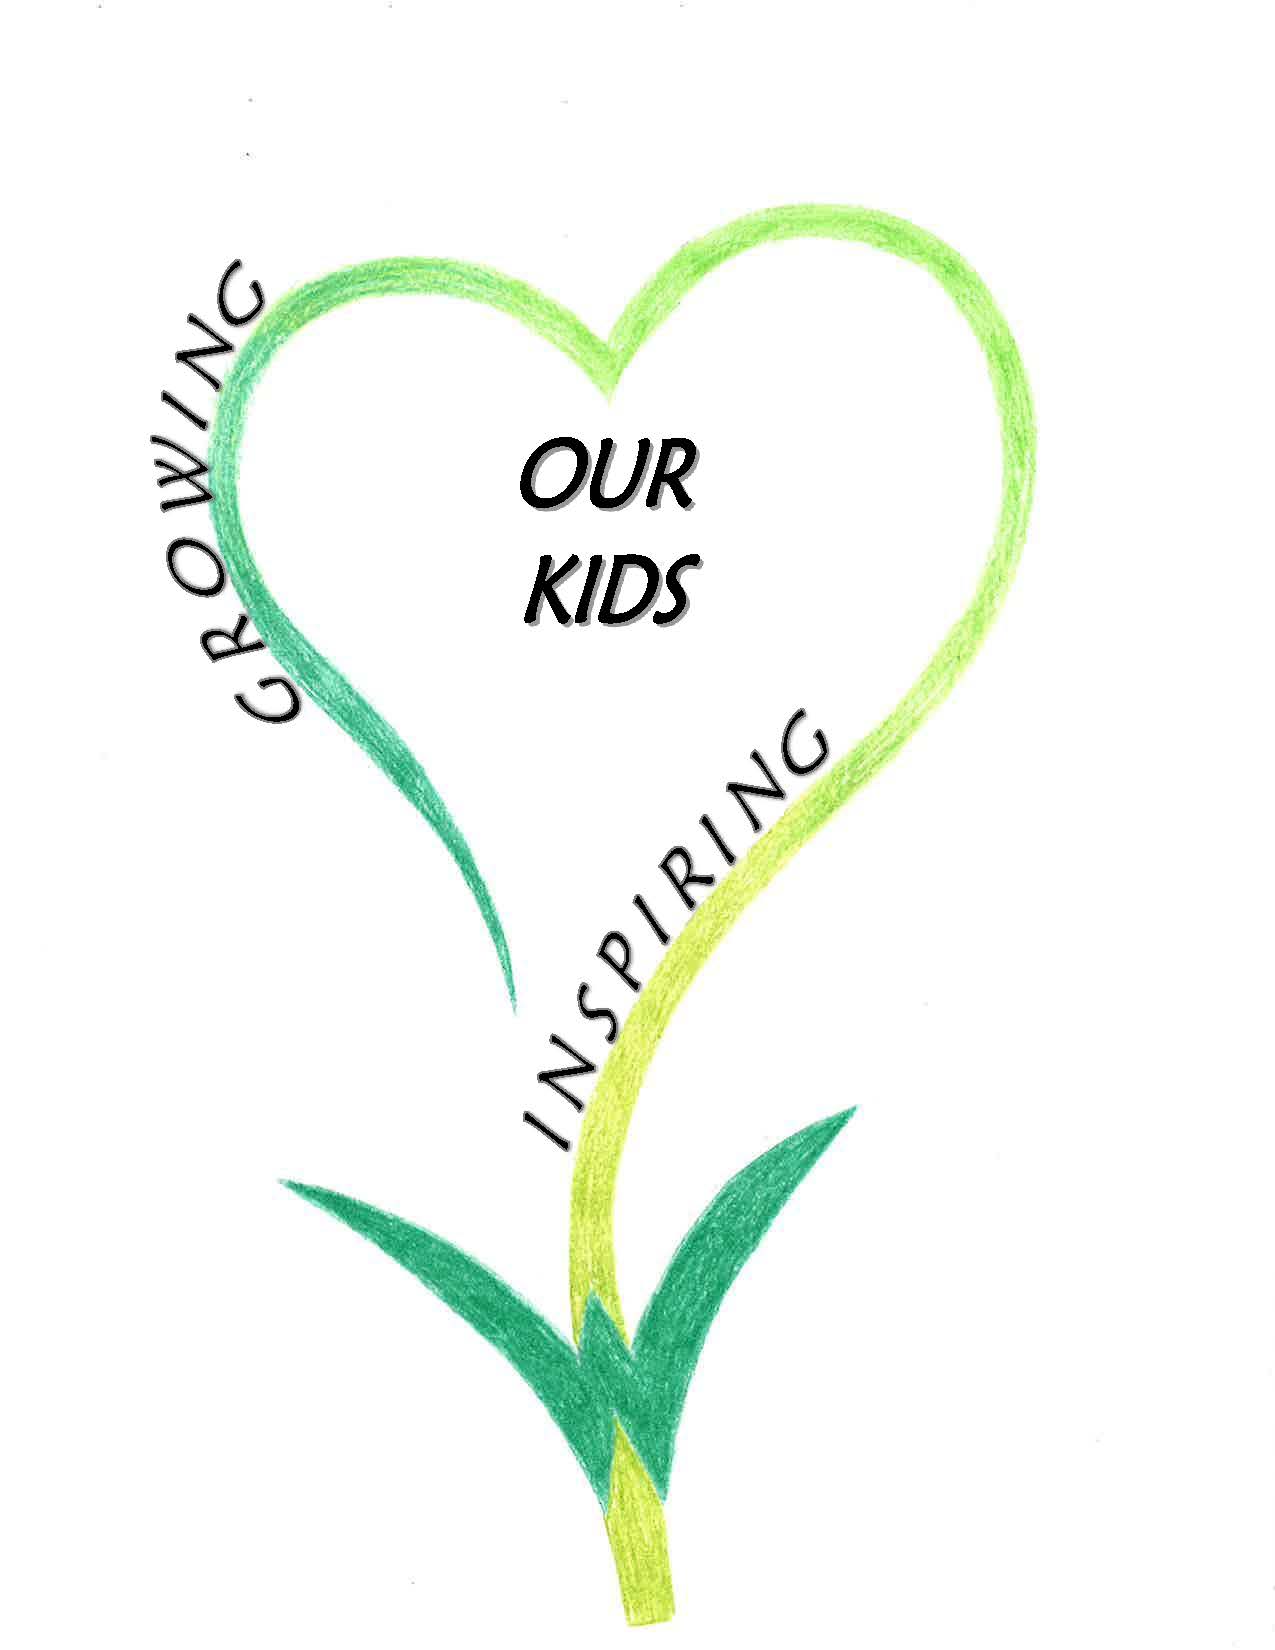 Mission Statement with heart flower design saying growing and inspiring our kids.